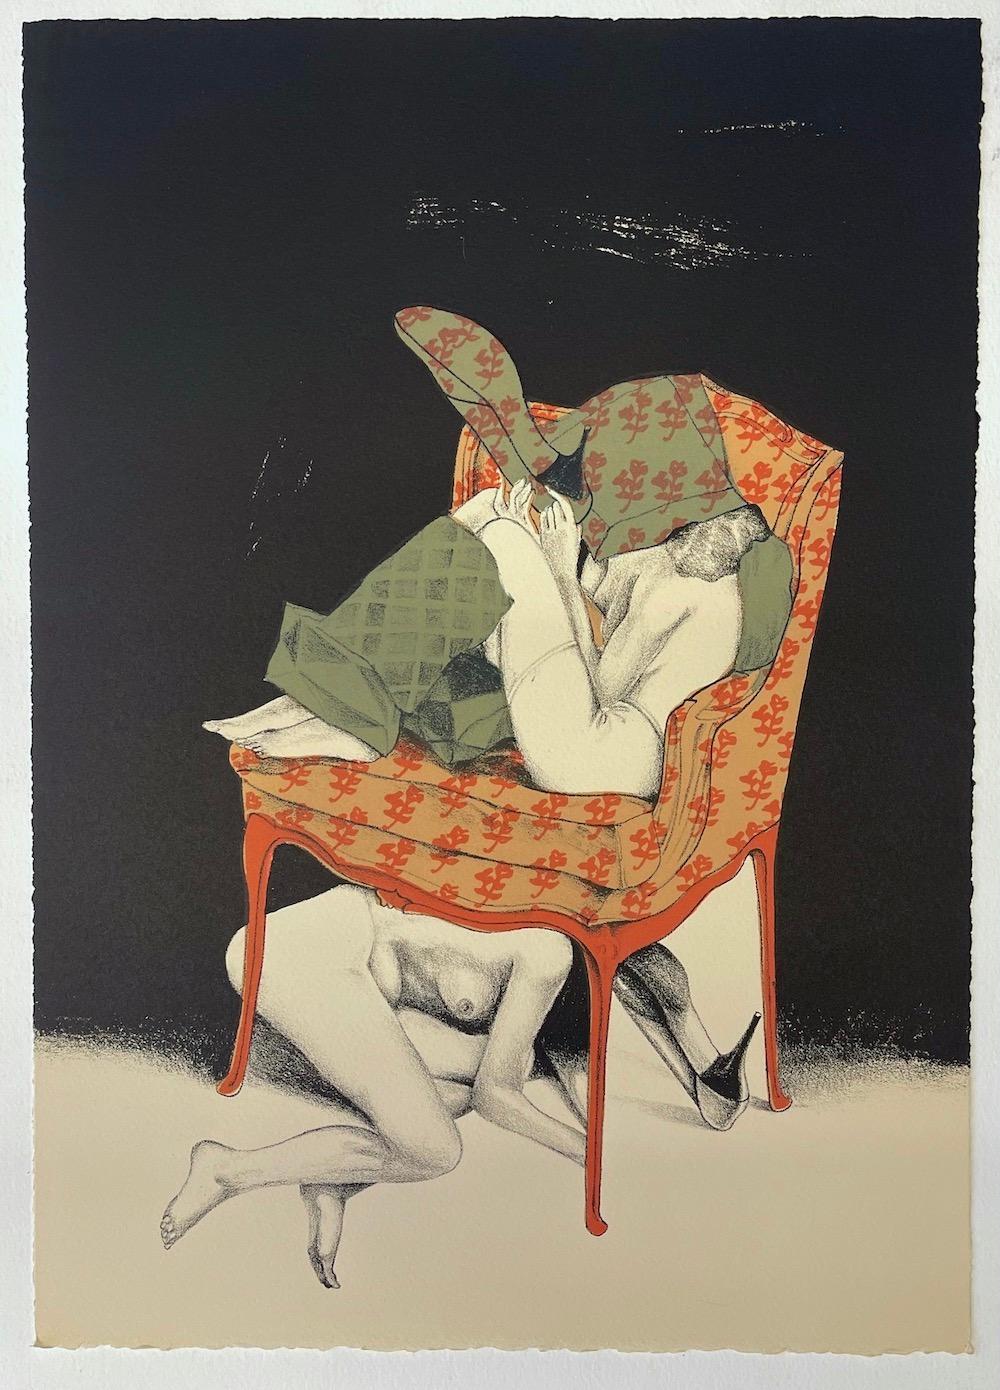  Two Nudes Posing With Armchair, Hand Drawn Stone Lithograph, Stiletto Heels - Realist Print by Mel Ramos